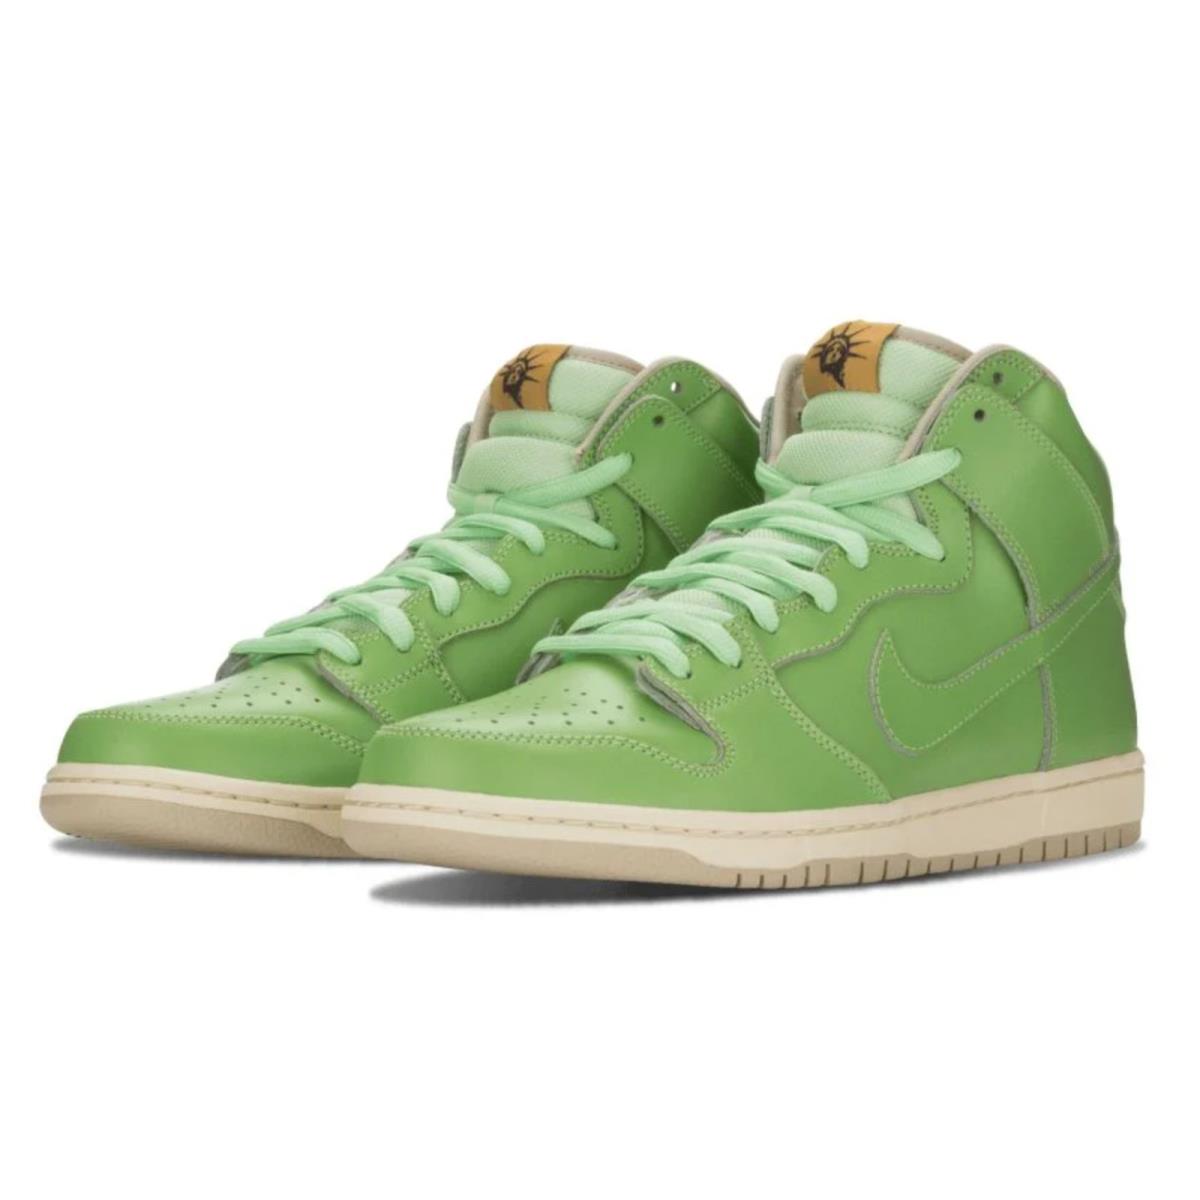 Size 10.5 - Nike SB Dunk High Premium Statue Of Liberty Nyc Seagrass 313171-302 - Green